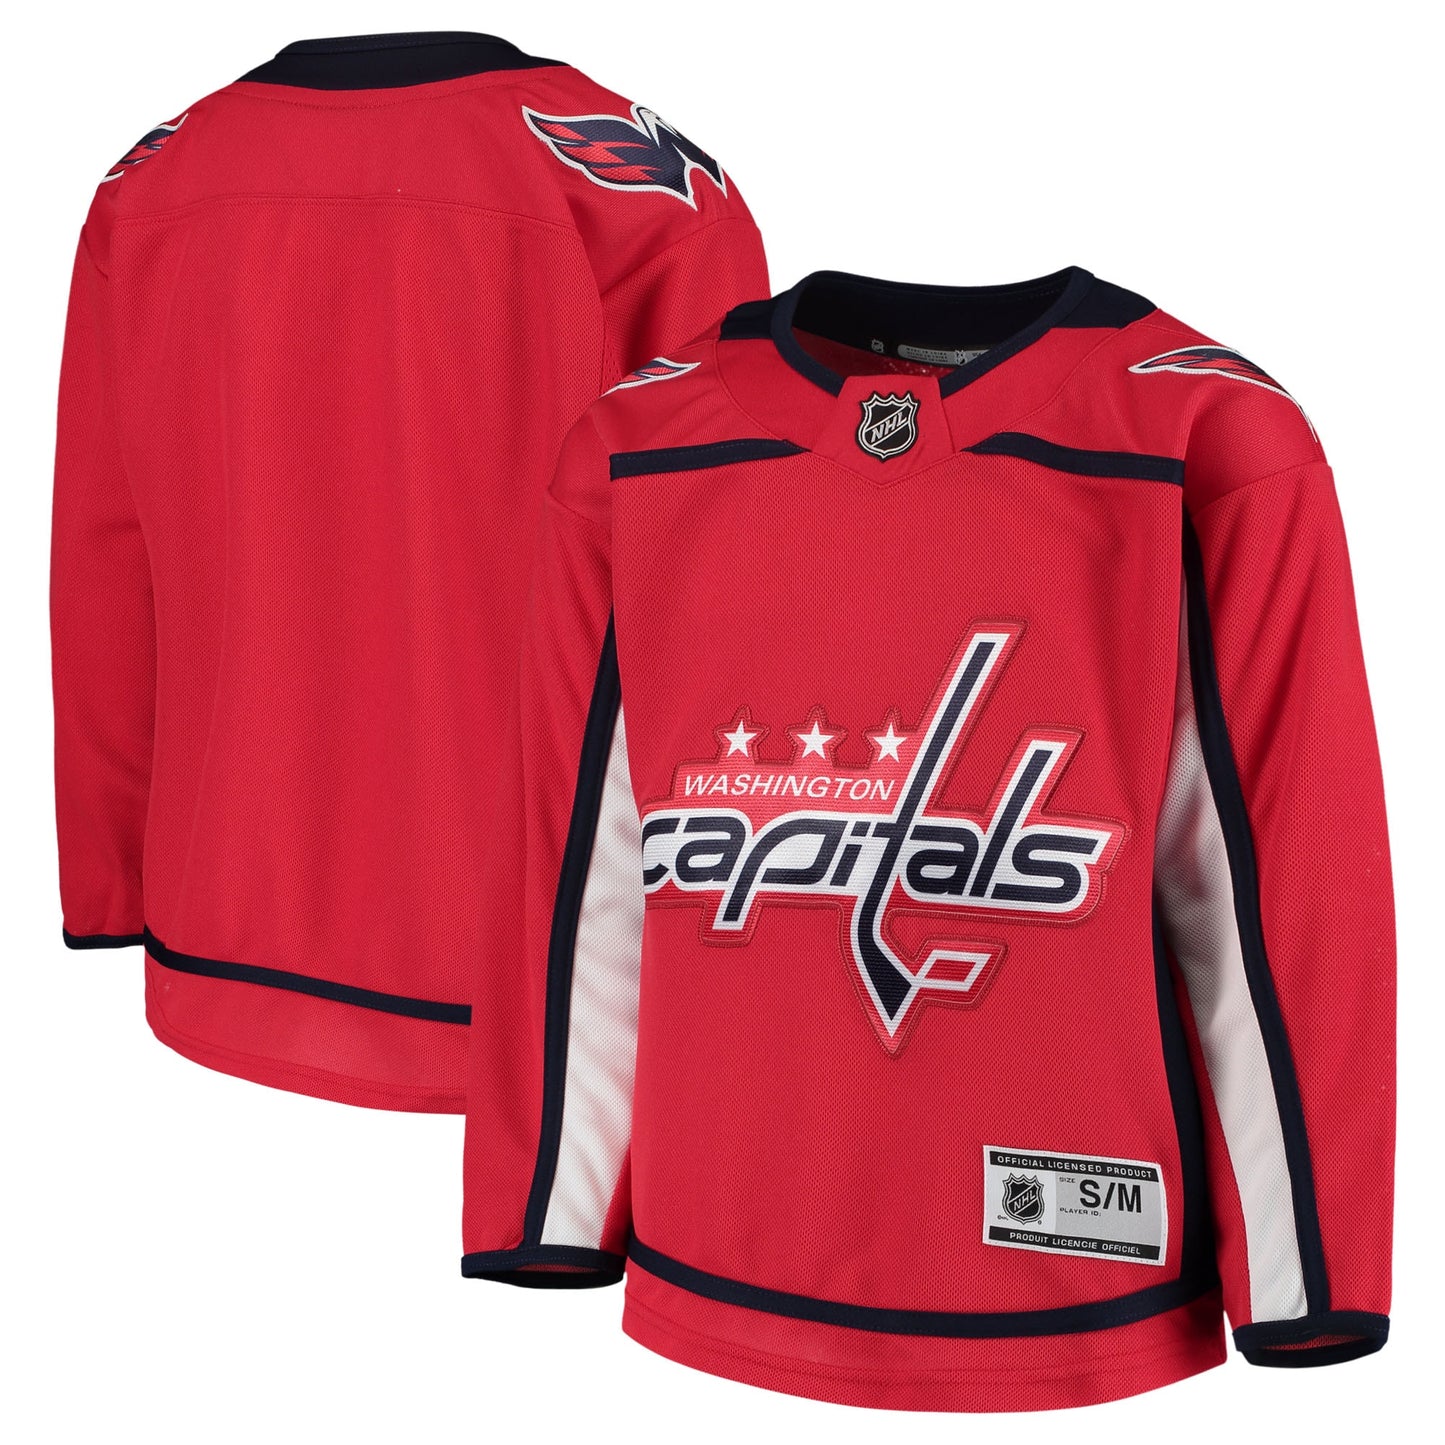 Washington Capitals Youth Home Premier Team Jersey - Red